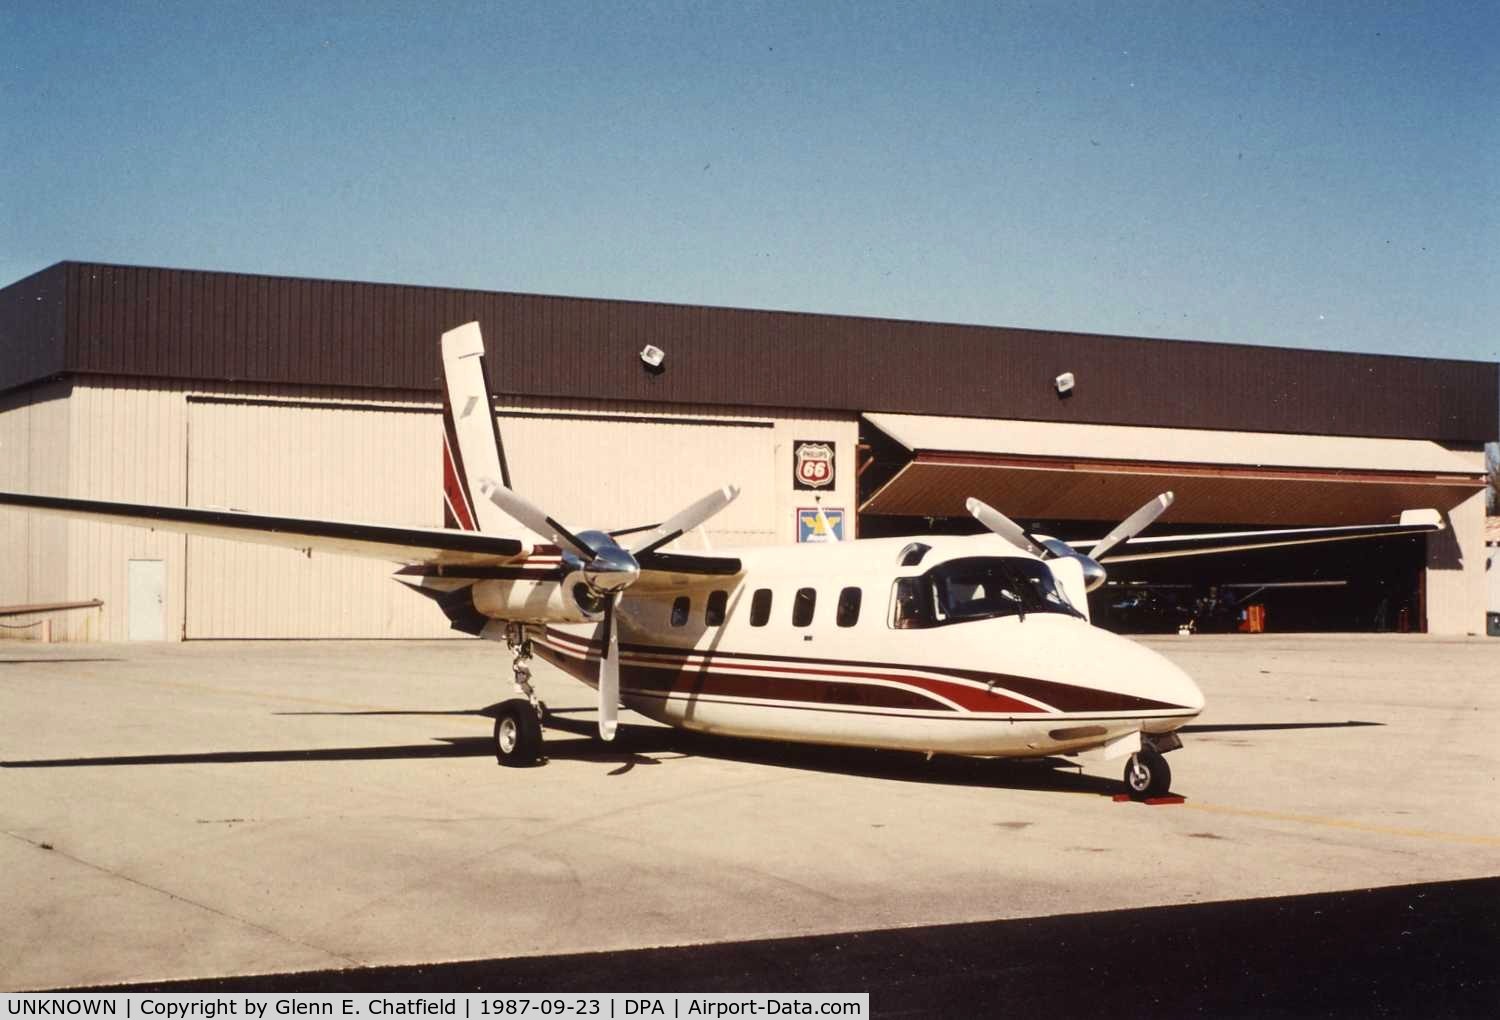 UNKNOWN, , Photo taken for aircraft recognition training. Commander Jetprop 1000